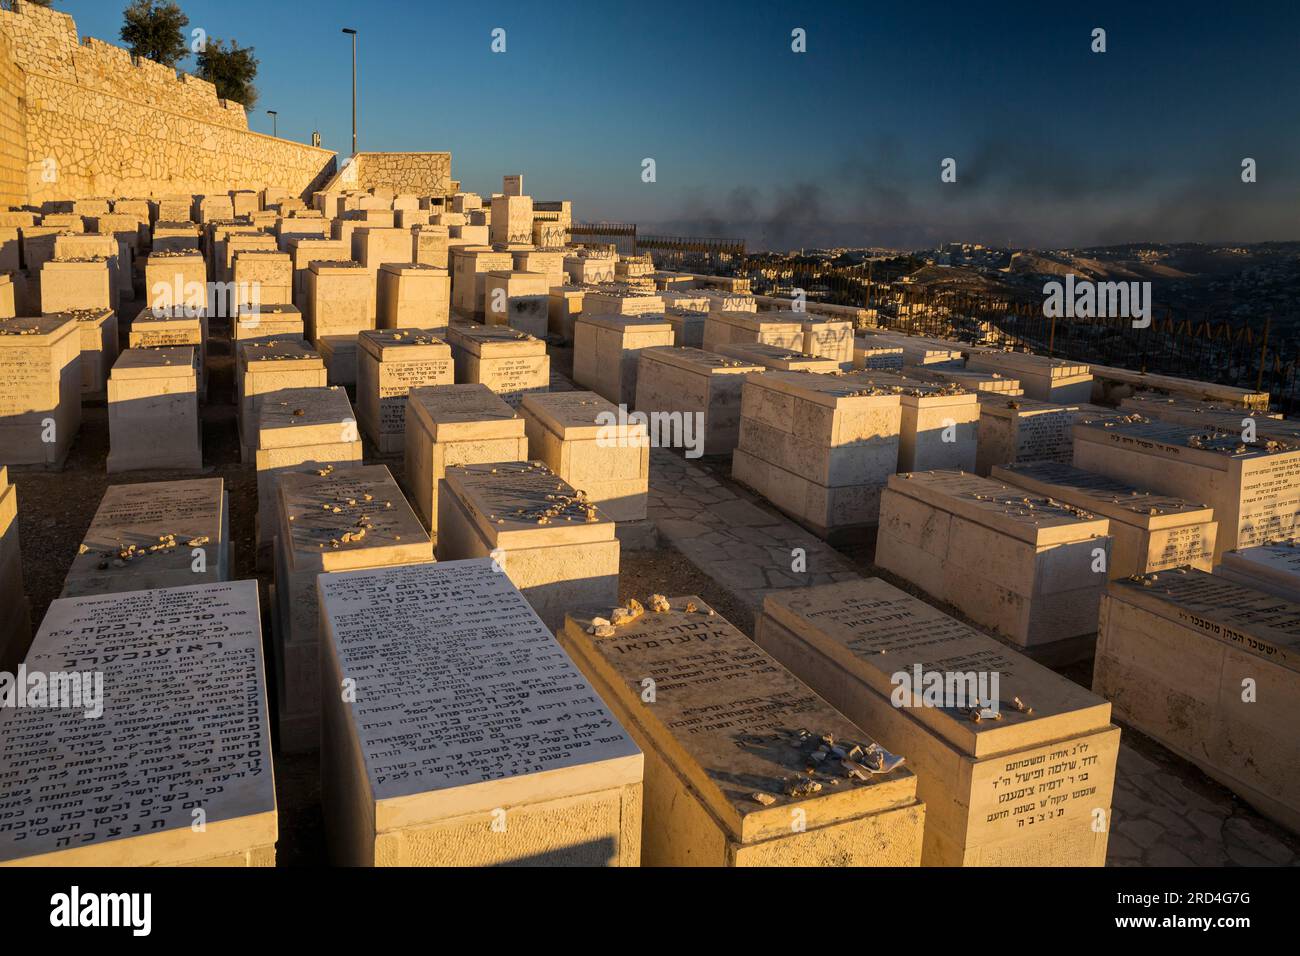 Panoramic view of the Mount of Olives Jewish Cemetery with the smoke on Gaza Strip in the background, Jerusalem, Israel Stock Photo